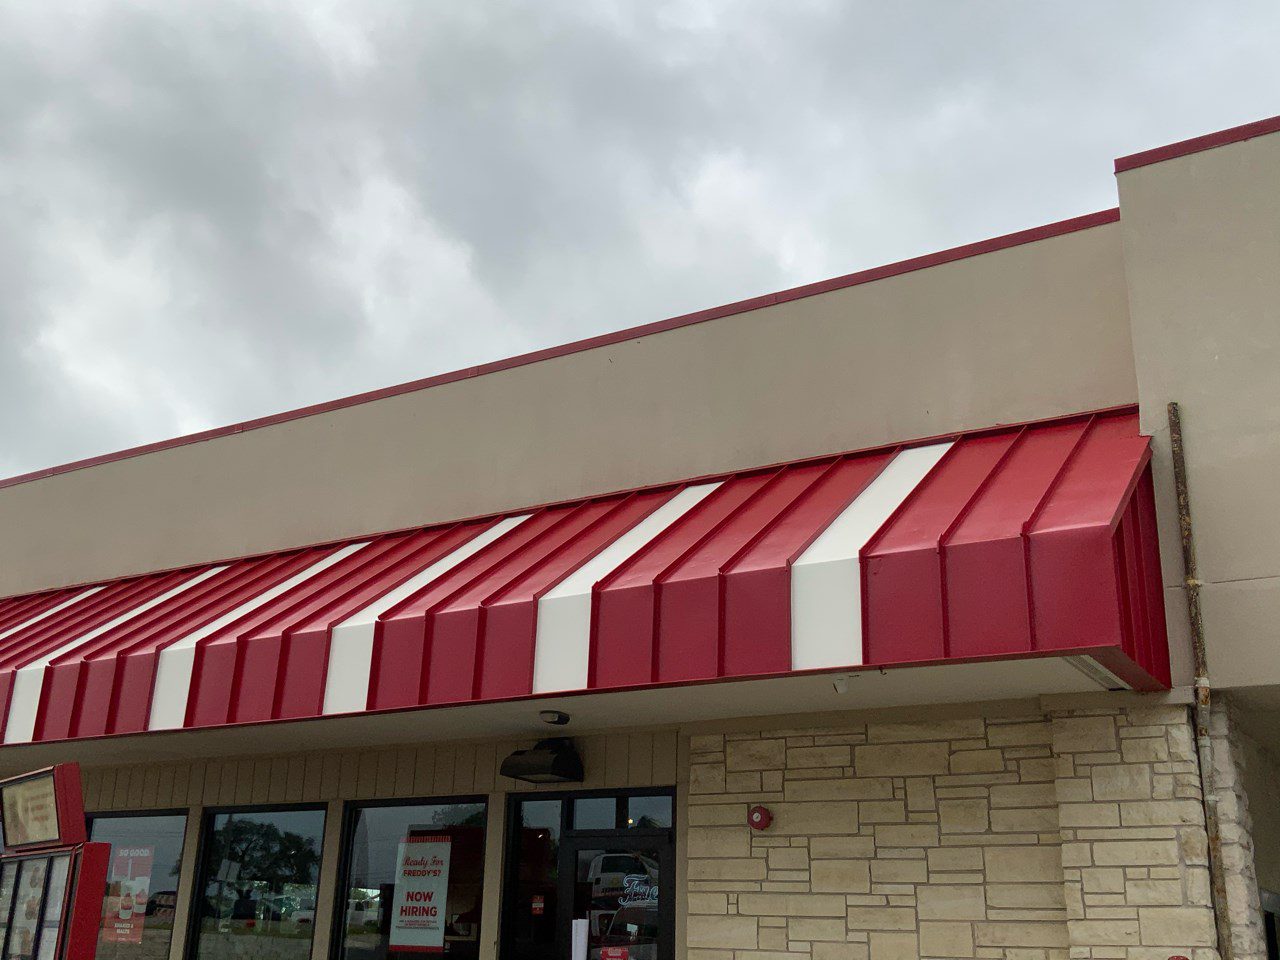 Repainted Red and White commercial metal awning